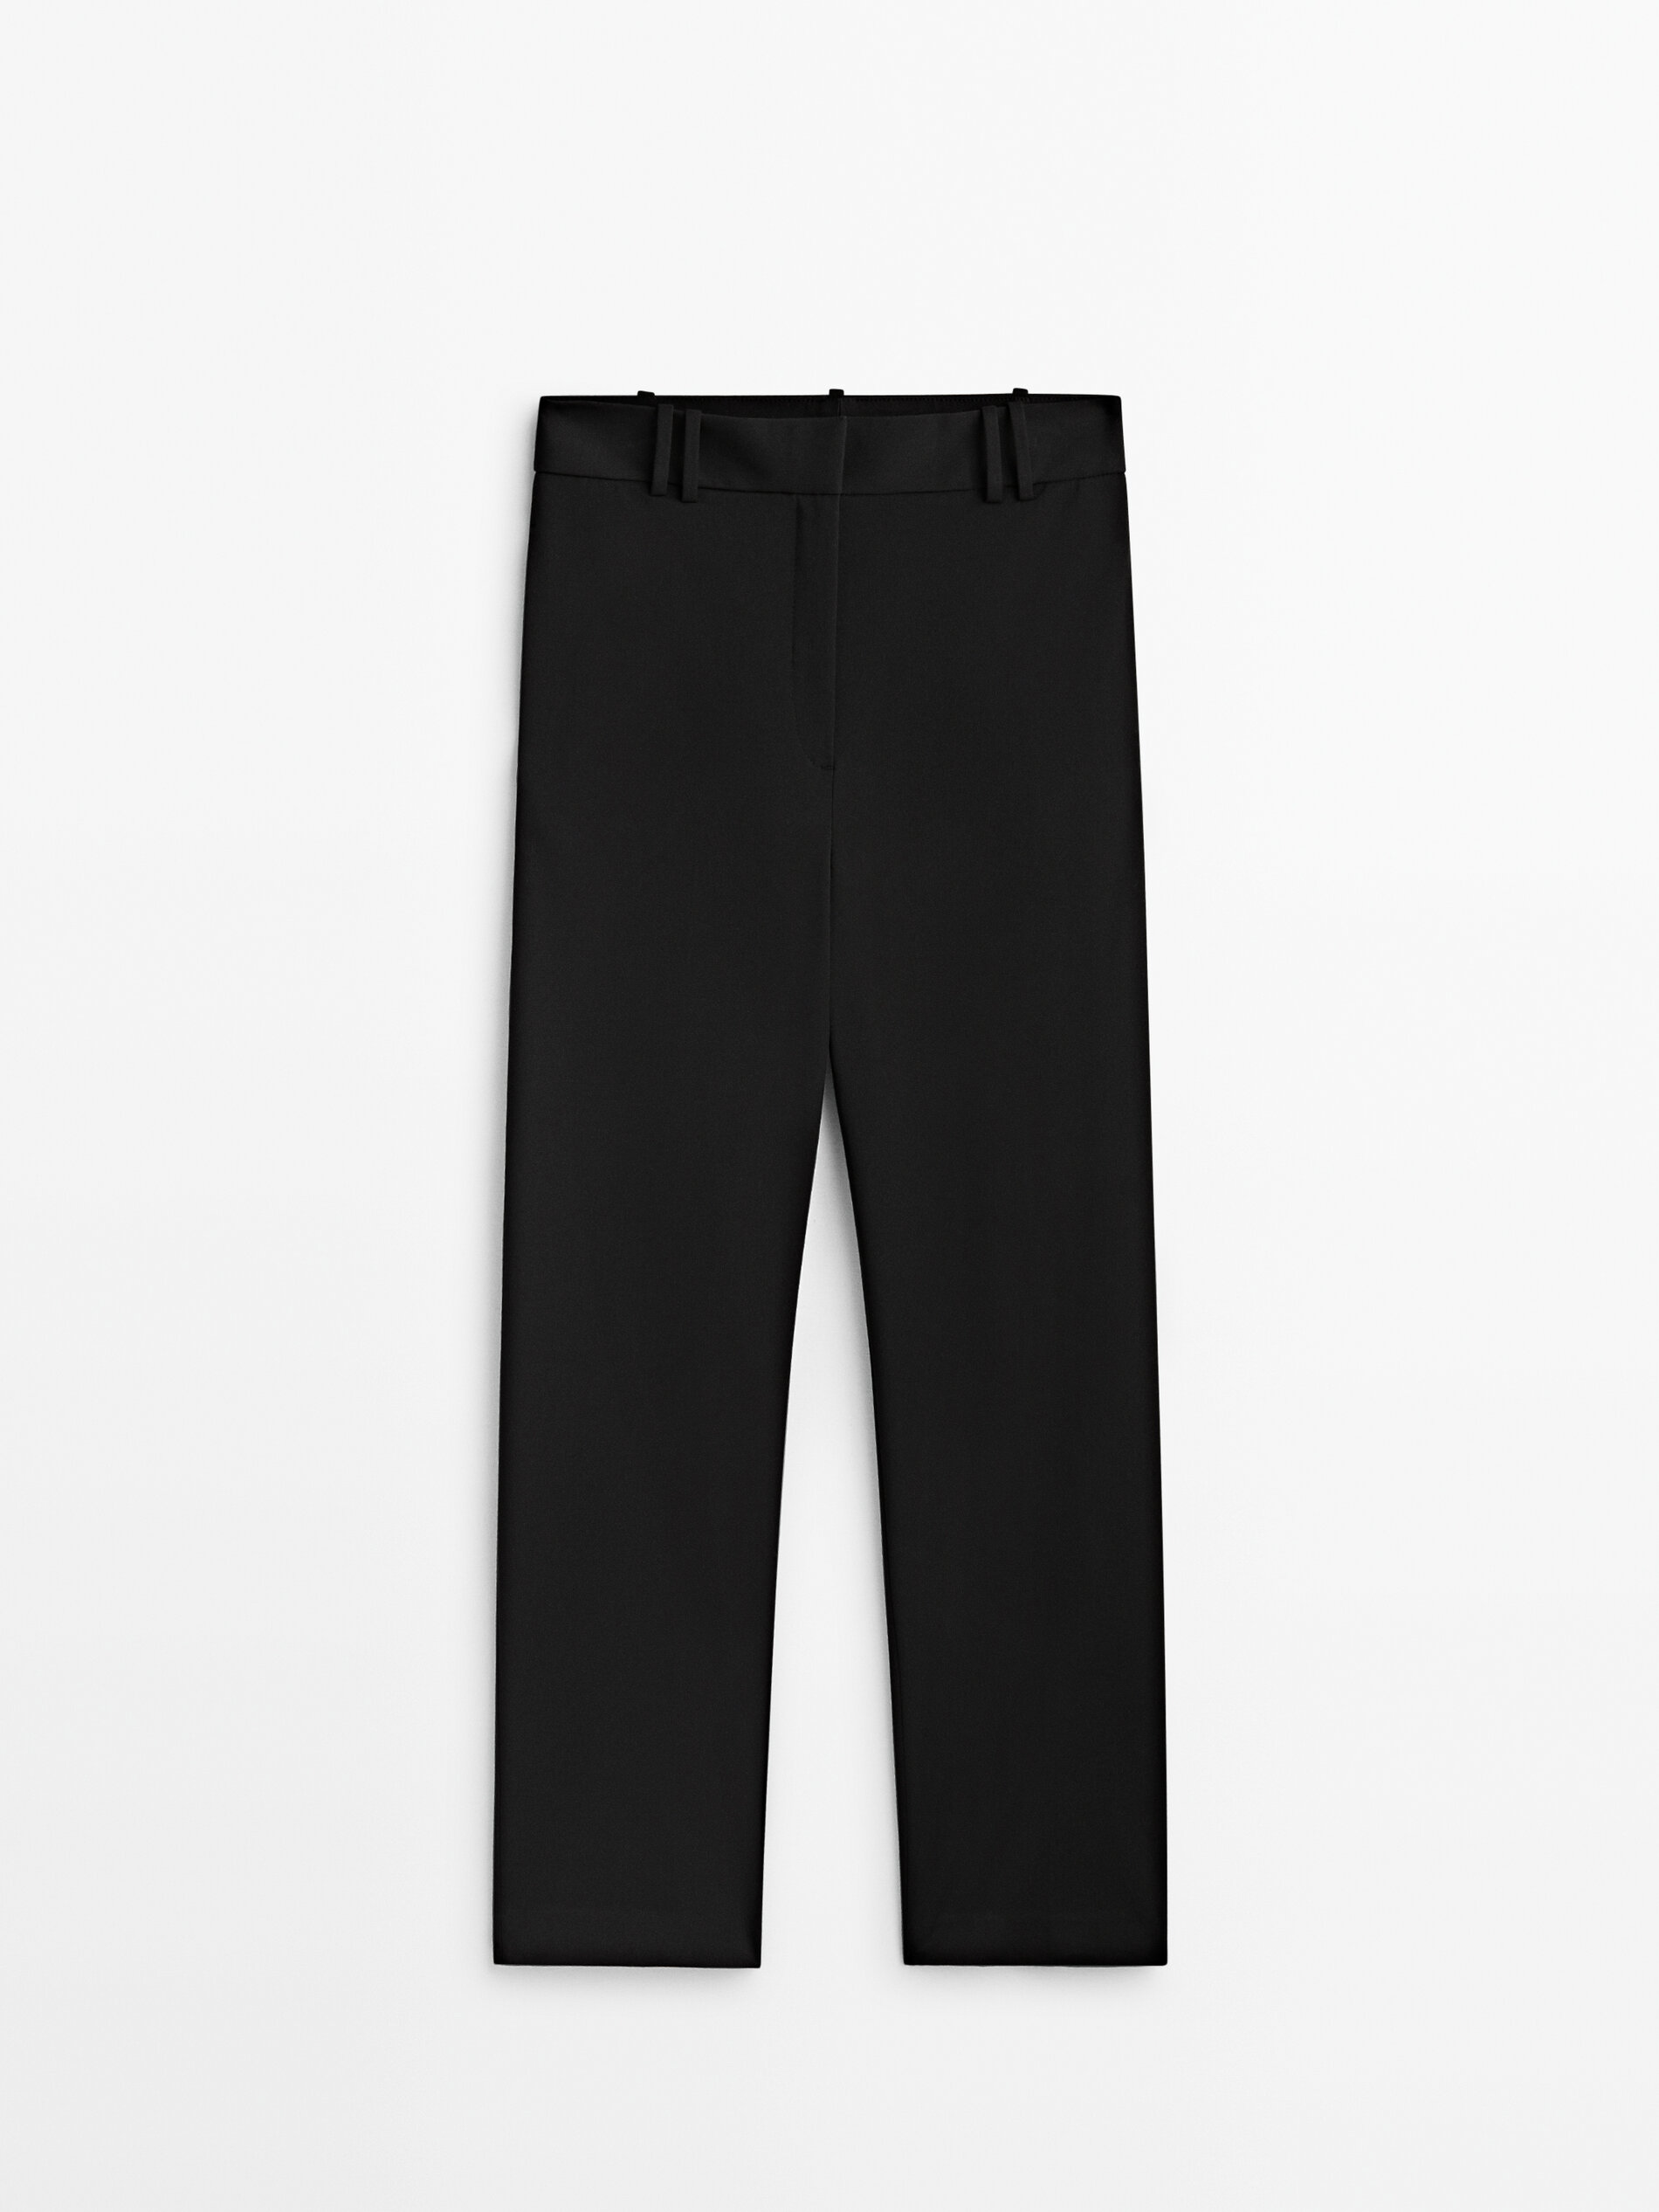 Buy Women Black  White Polyester Regular Fit Checked Cropped Trousers  online  Looksgudin